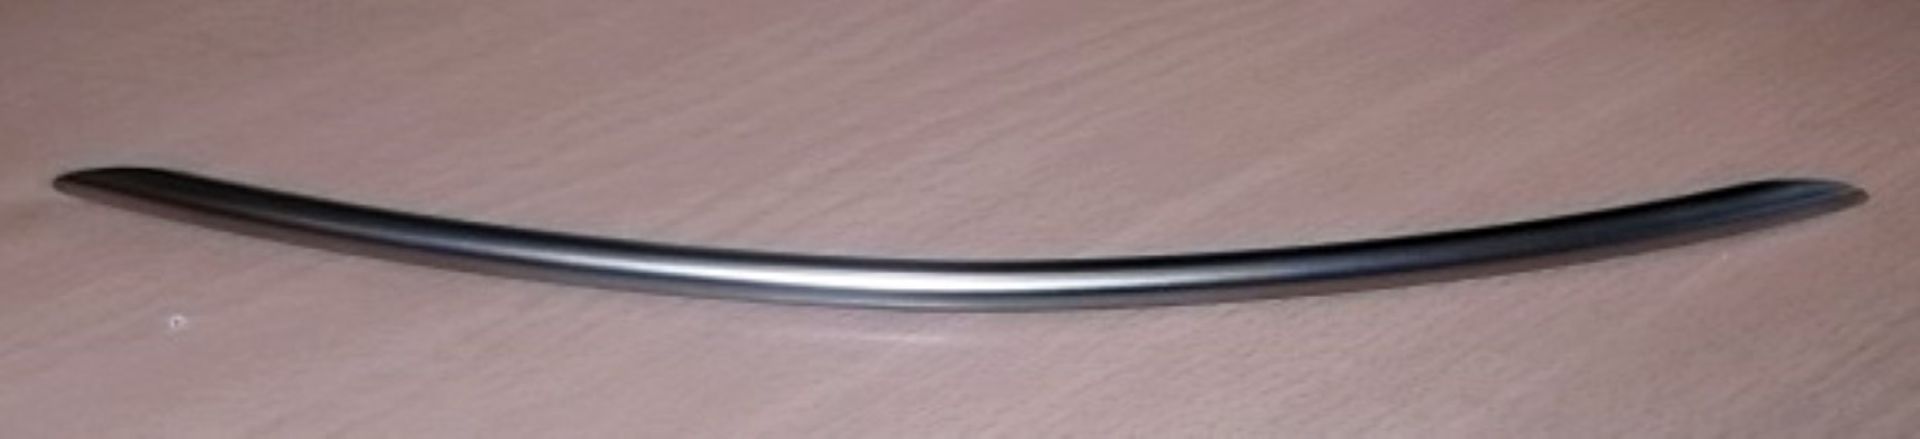 100 x BOW Handle Kitchen Door Handles By Crestwood - 320mm - New Stock - Brushed Nickel Finish - - Image 6 of 8